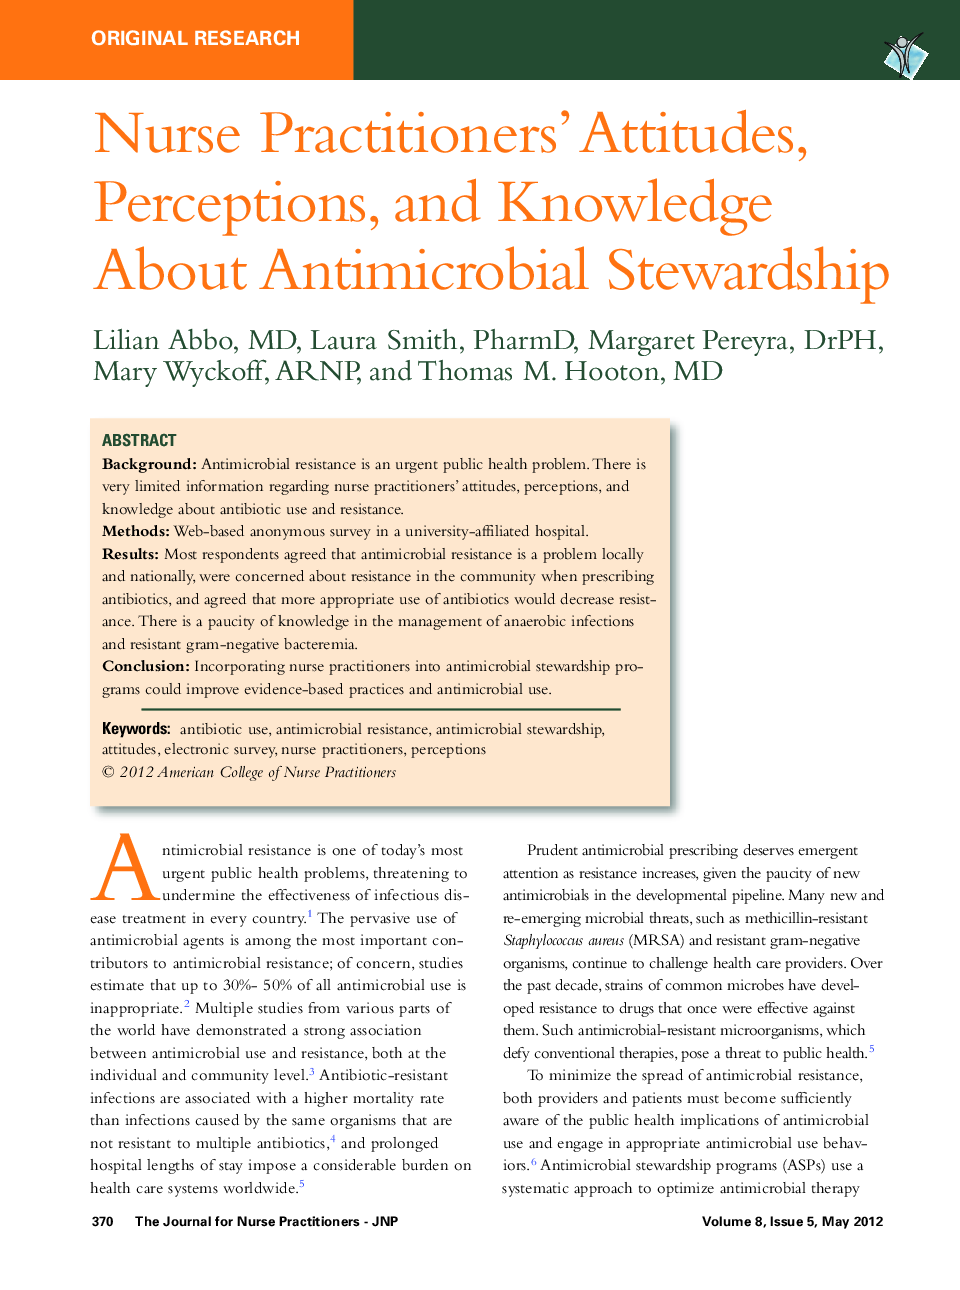 Nurse Practitioners' Attitudes, Perceptions, and Knowledge About Antimicrobial Stewardship 